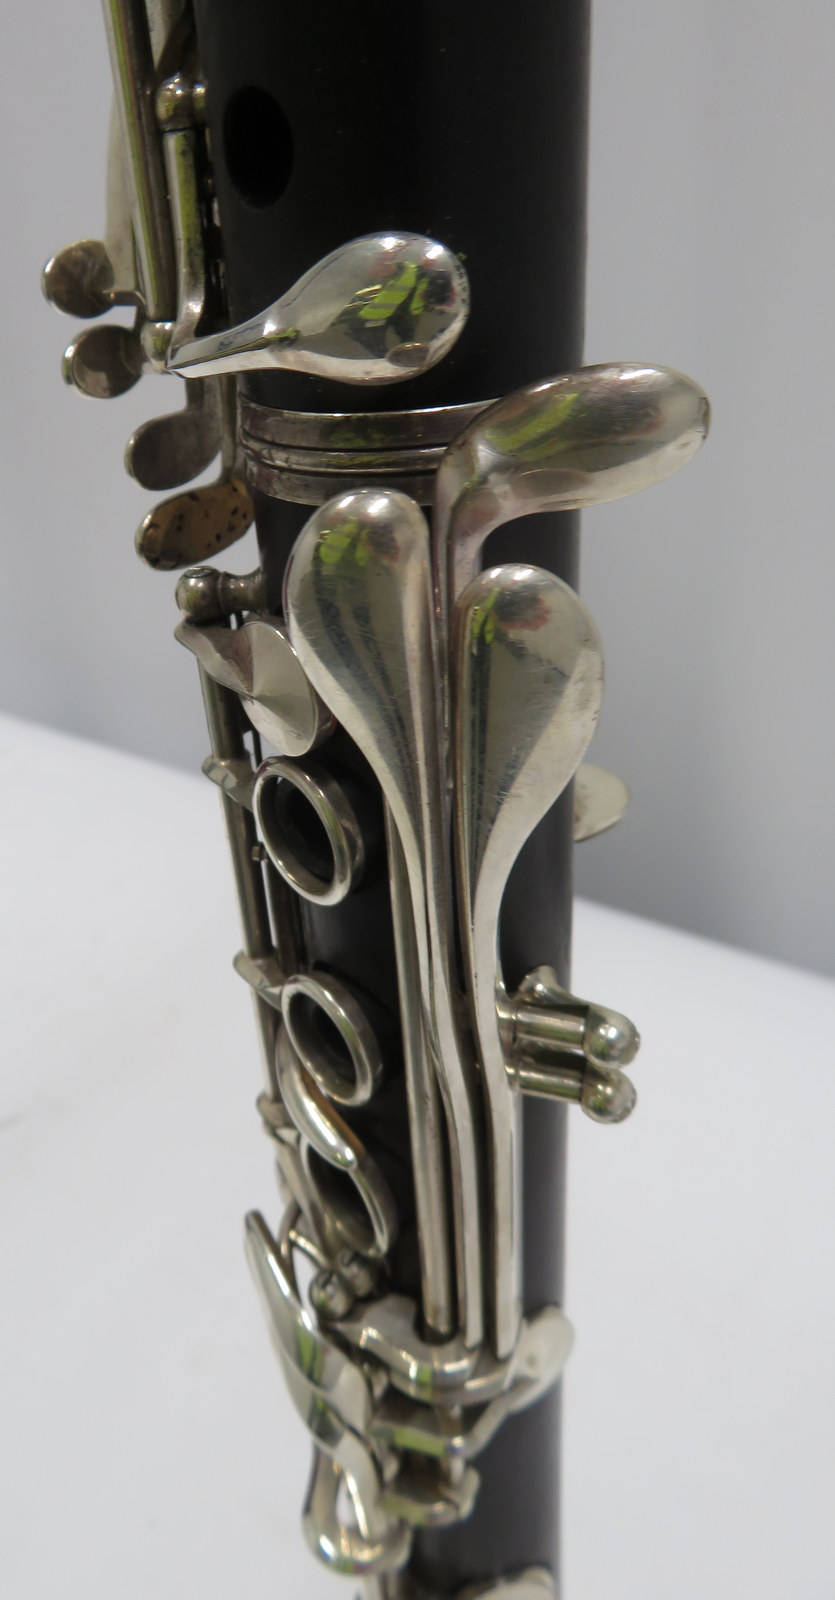 Buffet Crampon R13 clarinet with case. Serial number: 437527. - Image 9 of 21